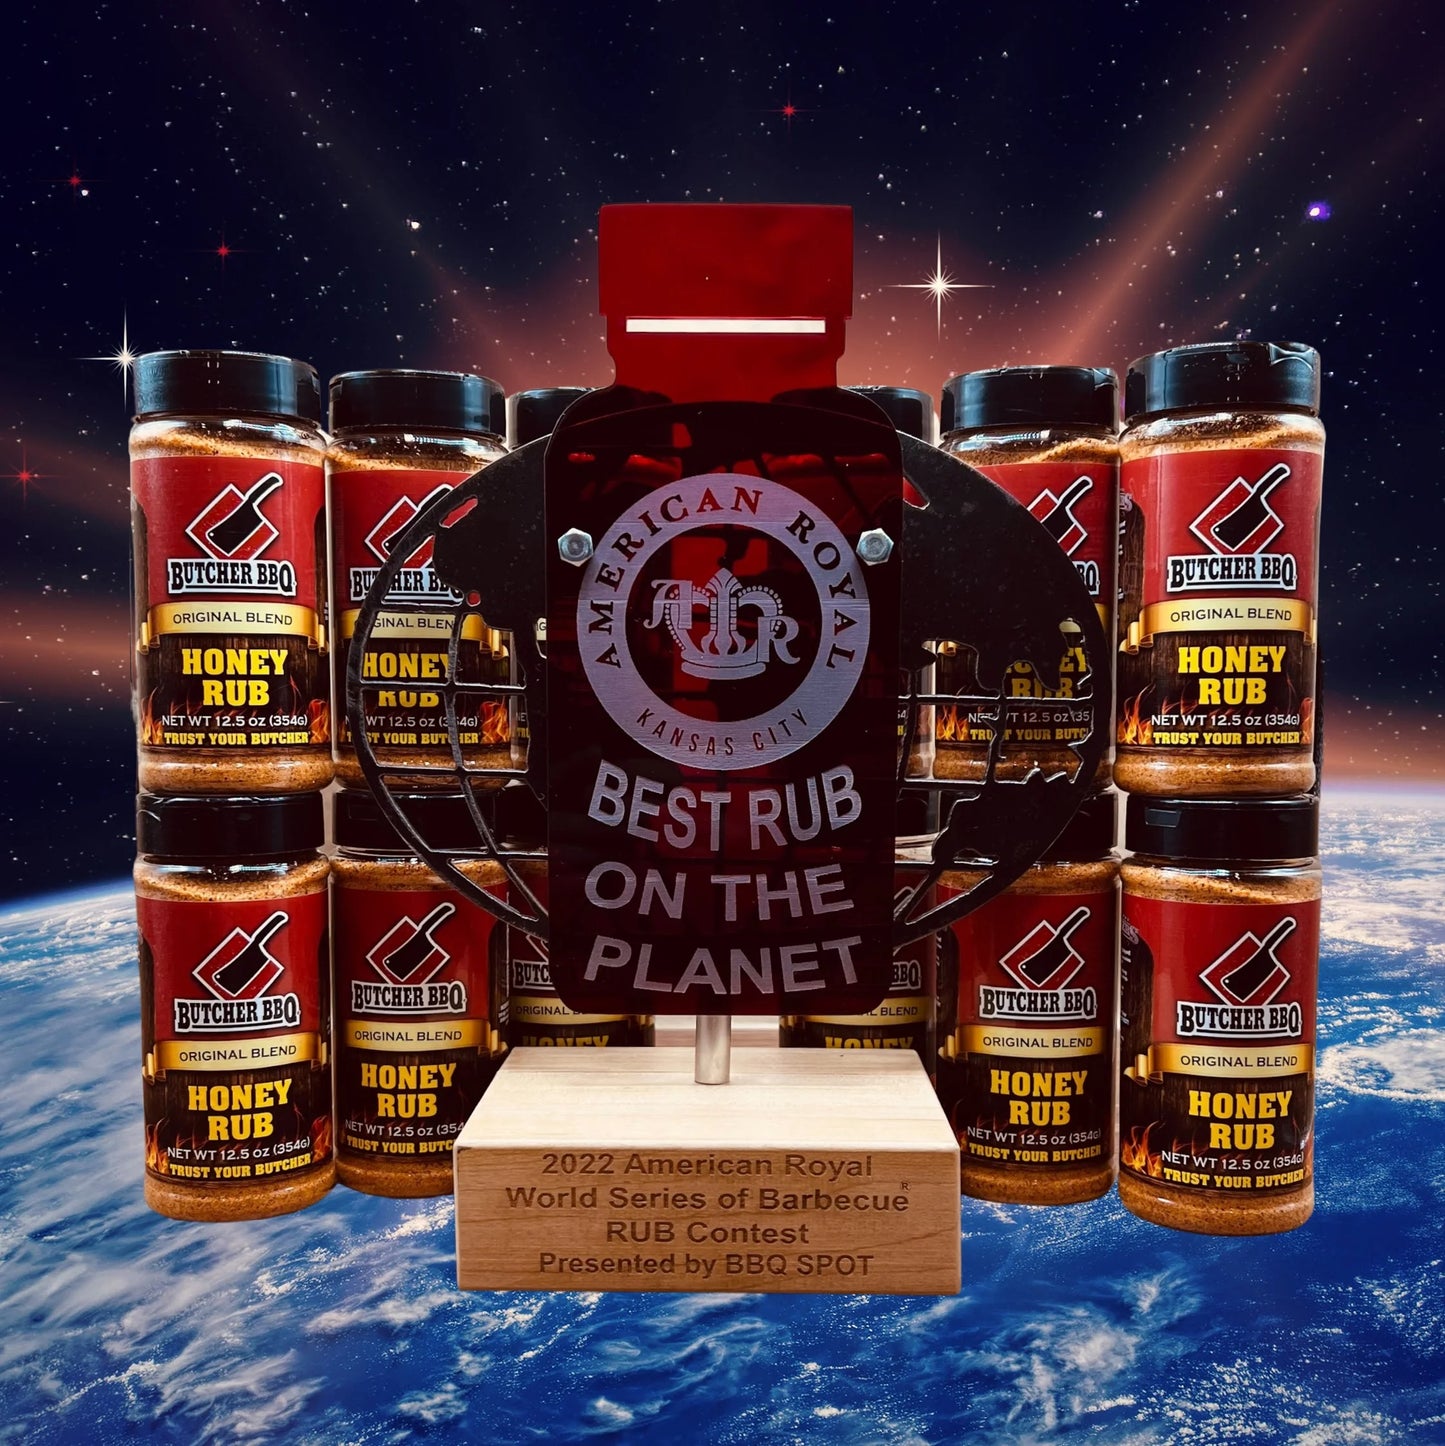 Honey Rub was named best rub on the planet during the 2022 American Royal World Series of Barbecue rub contest.